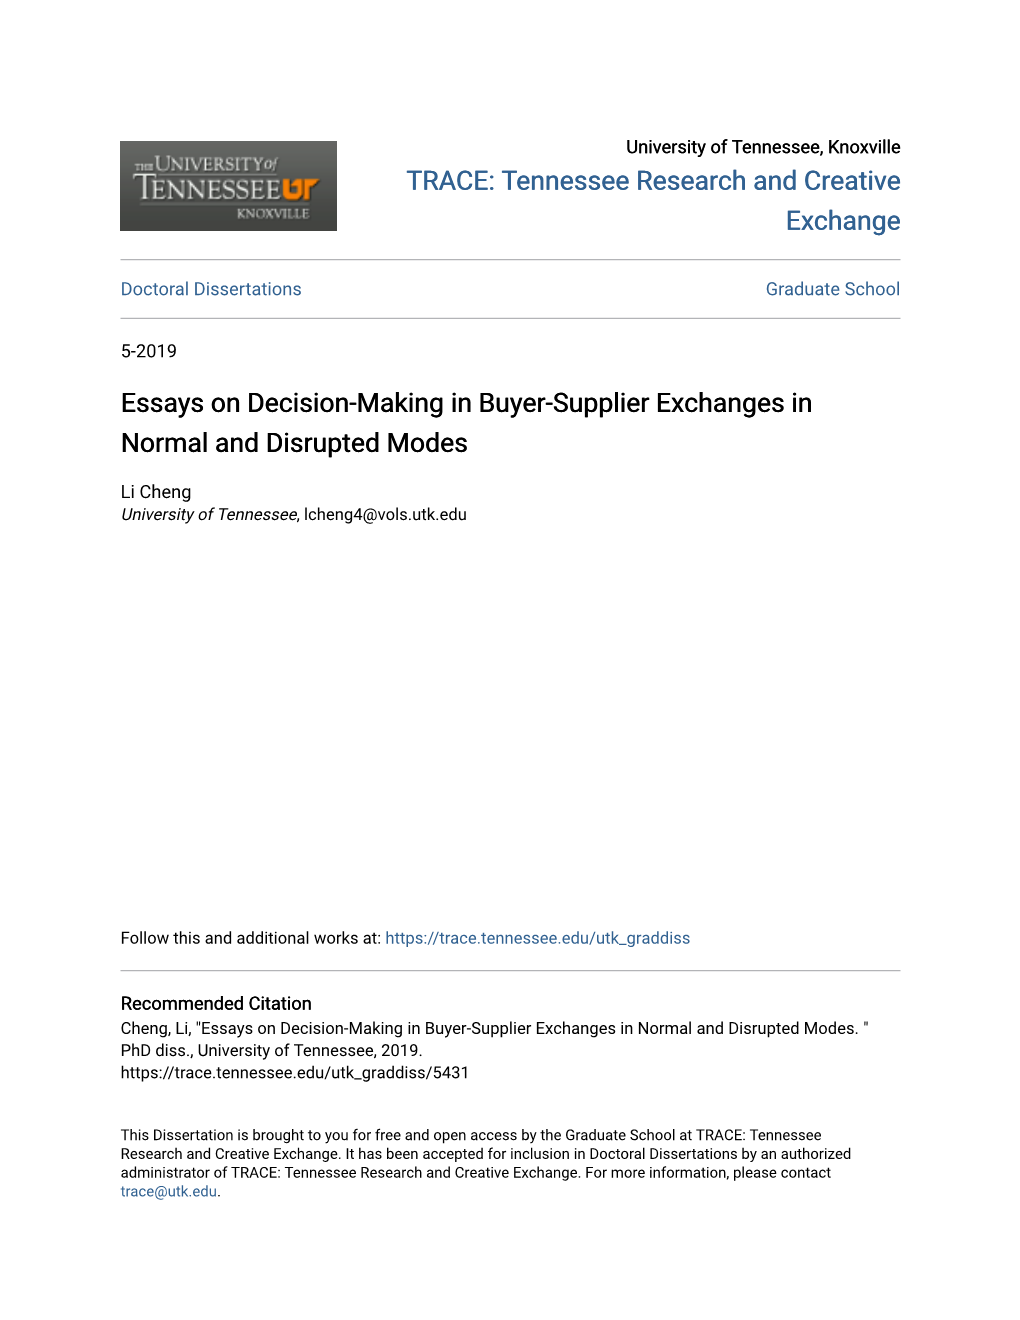 Essays on Decision-Making in Buyer-Supplier Exchanges in Normal and Disrupted Modes